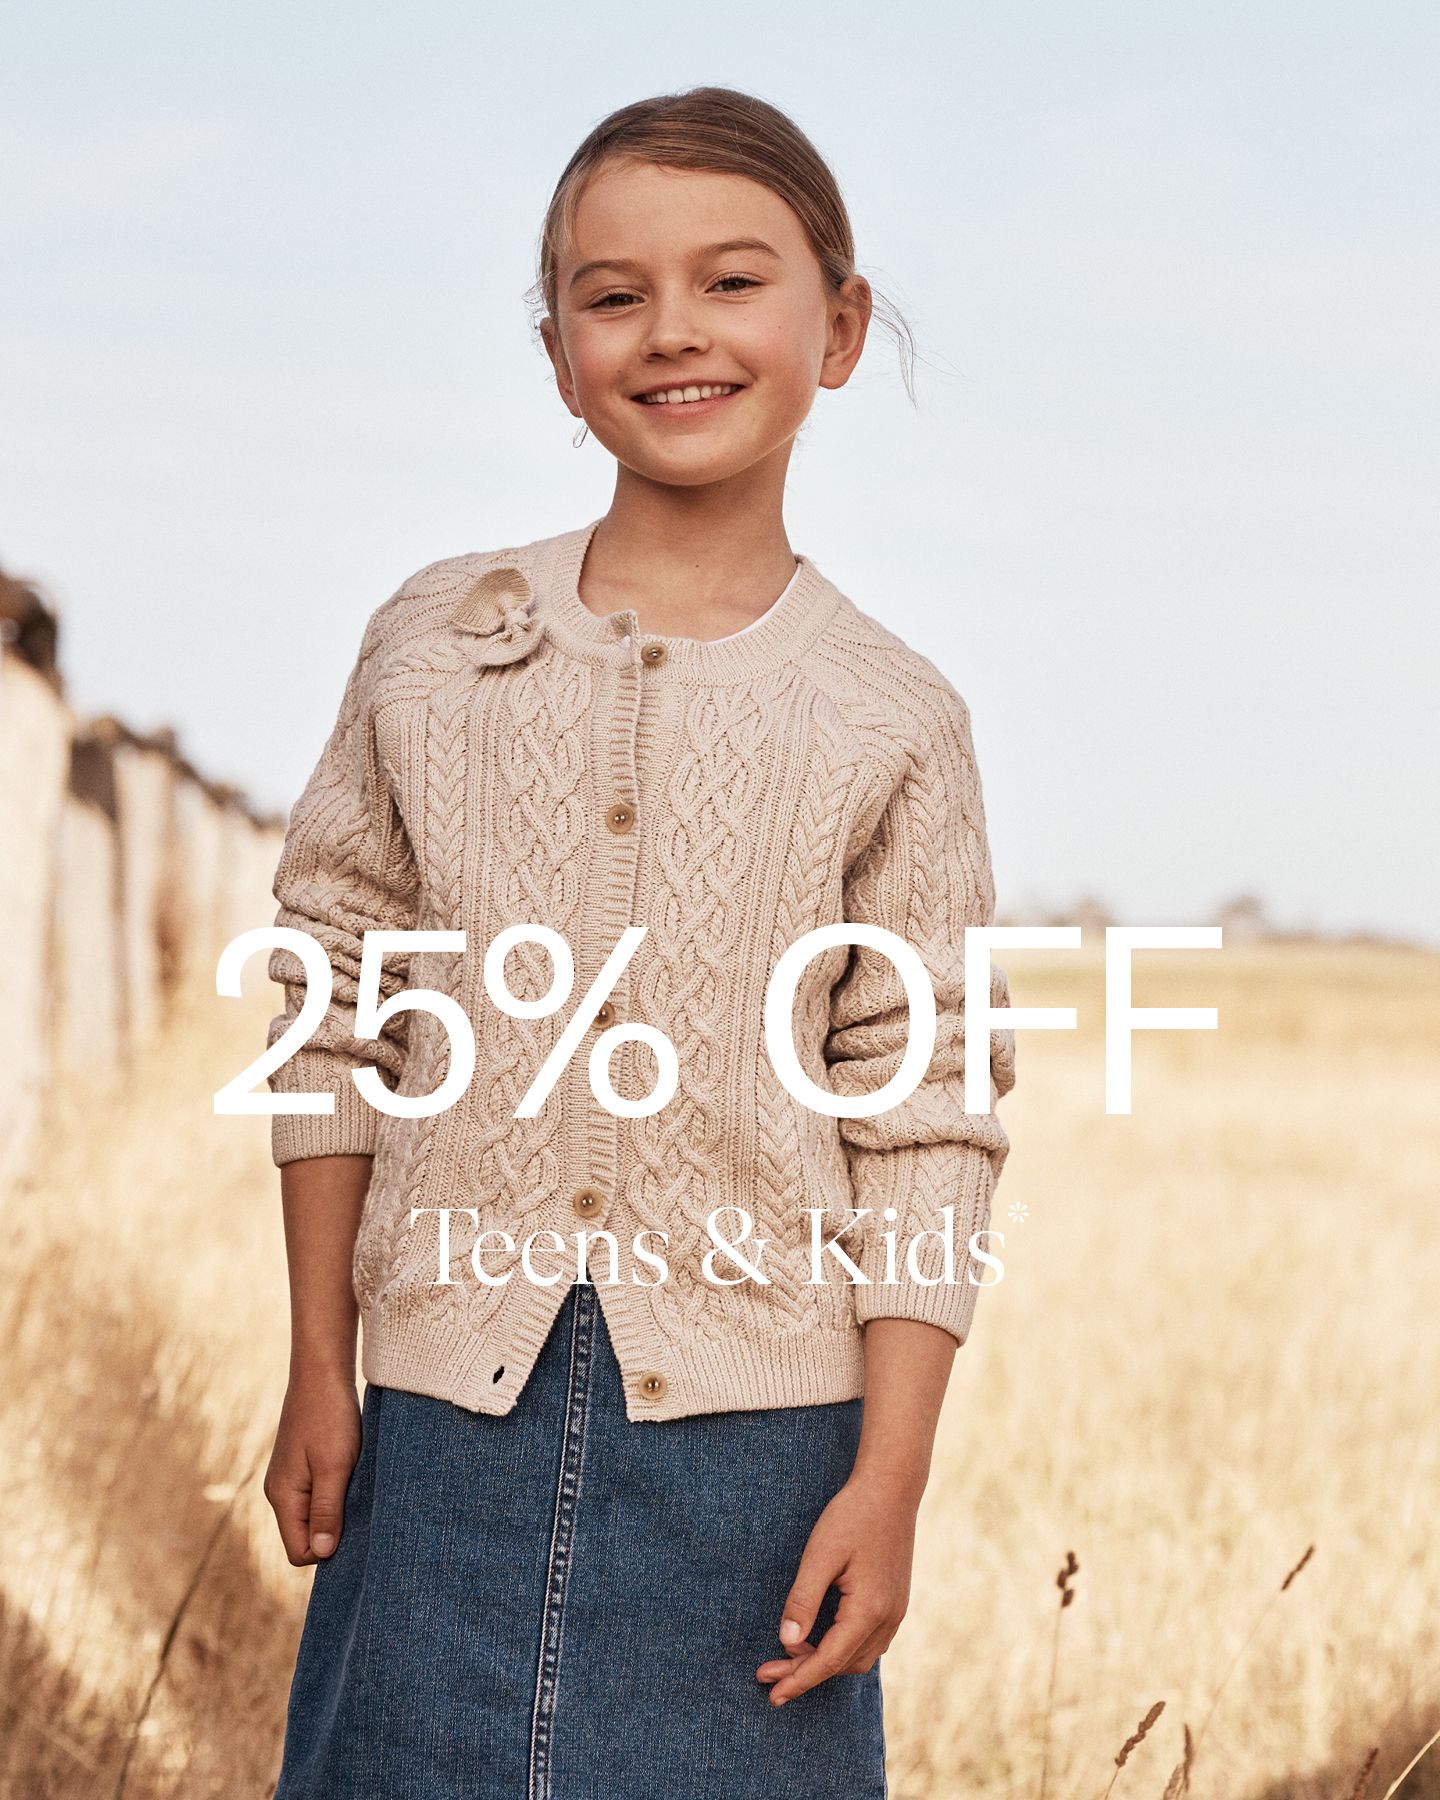 25% off Teens & Kids*

Get them ready for adventure with 25% of...

Shop via the link in bio 

#RBSellars